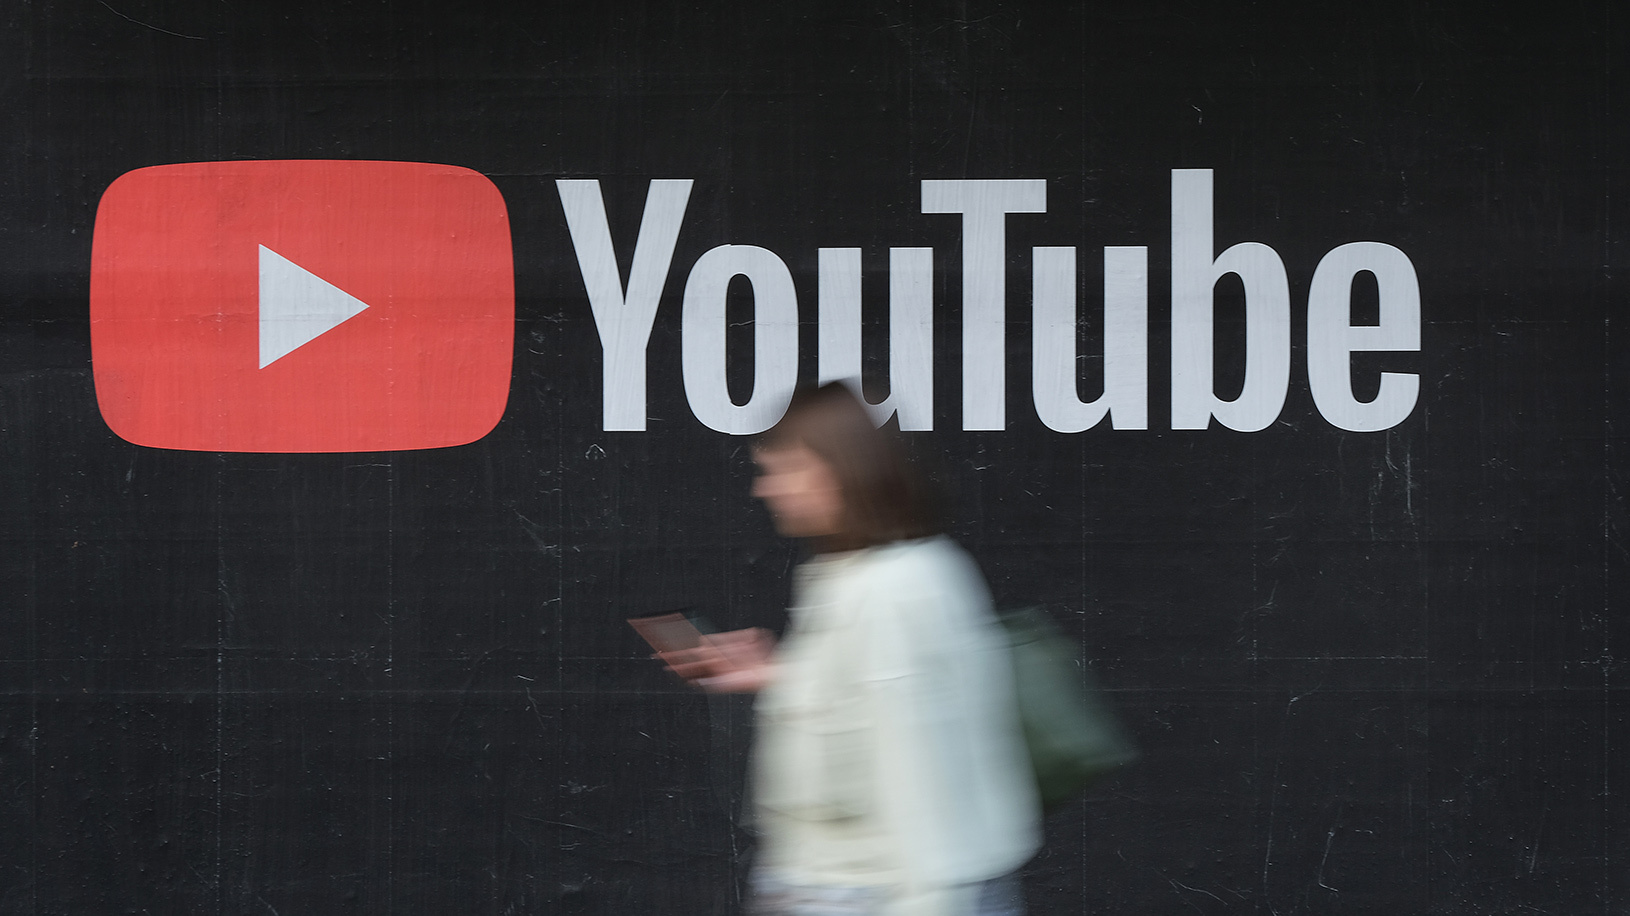 blurred person with a smartphone walking in front of the YouTube logo